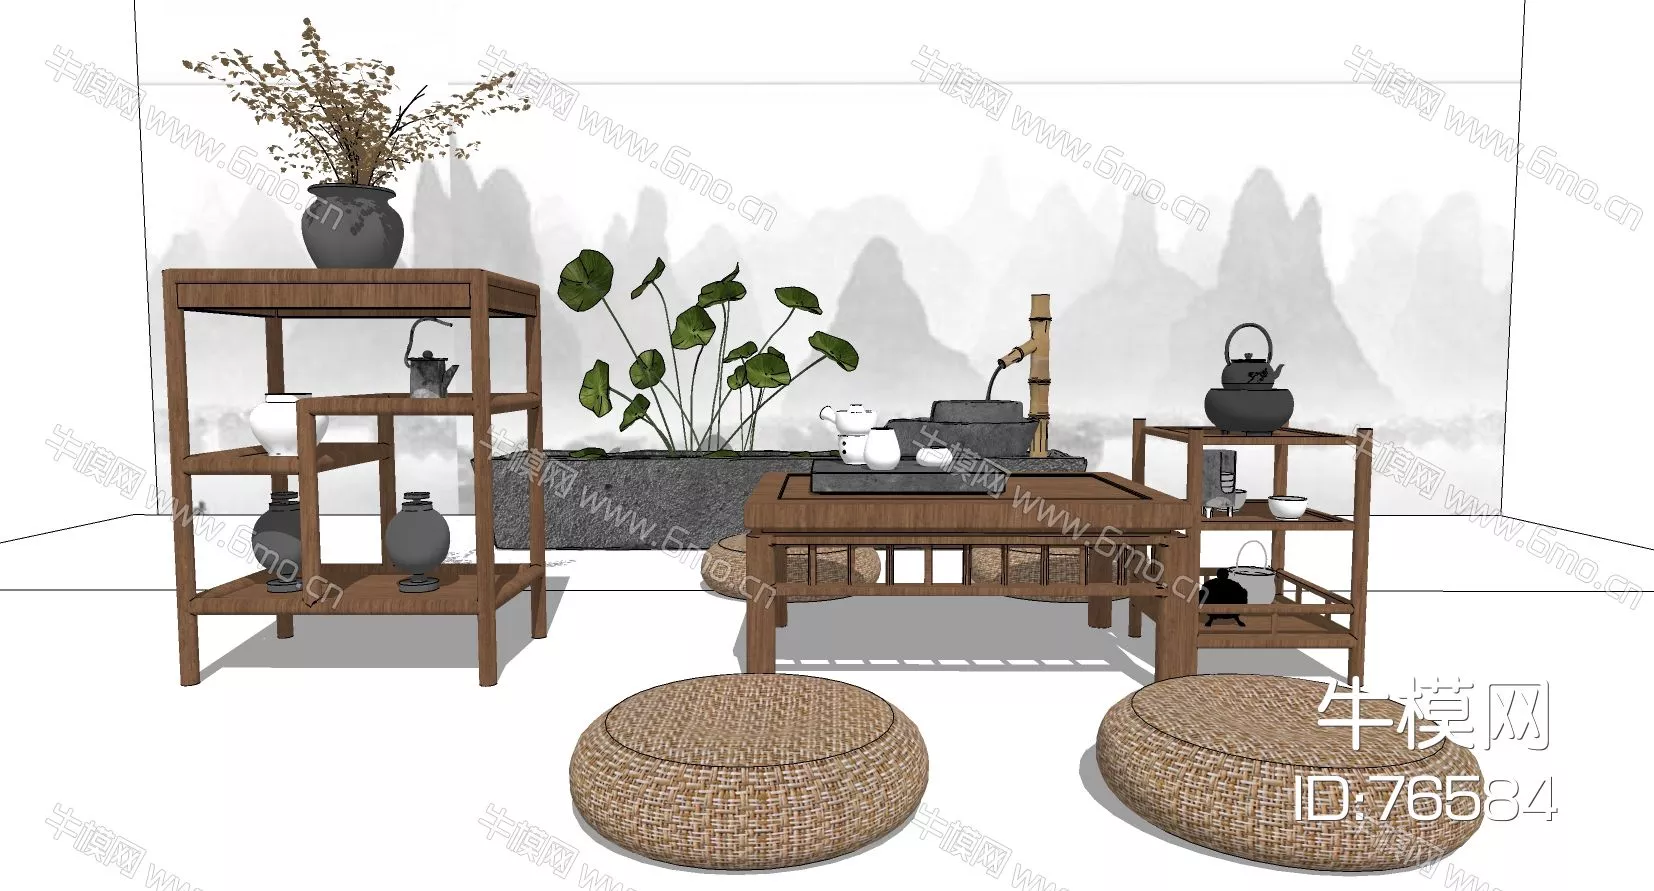 CHINESE COFFEE TABLE - SKETCHUP 3D MODEL - ENSCAPE - 76584